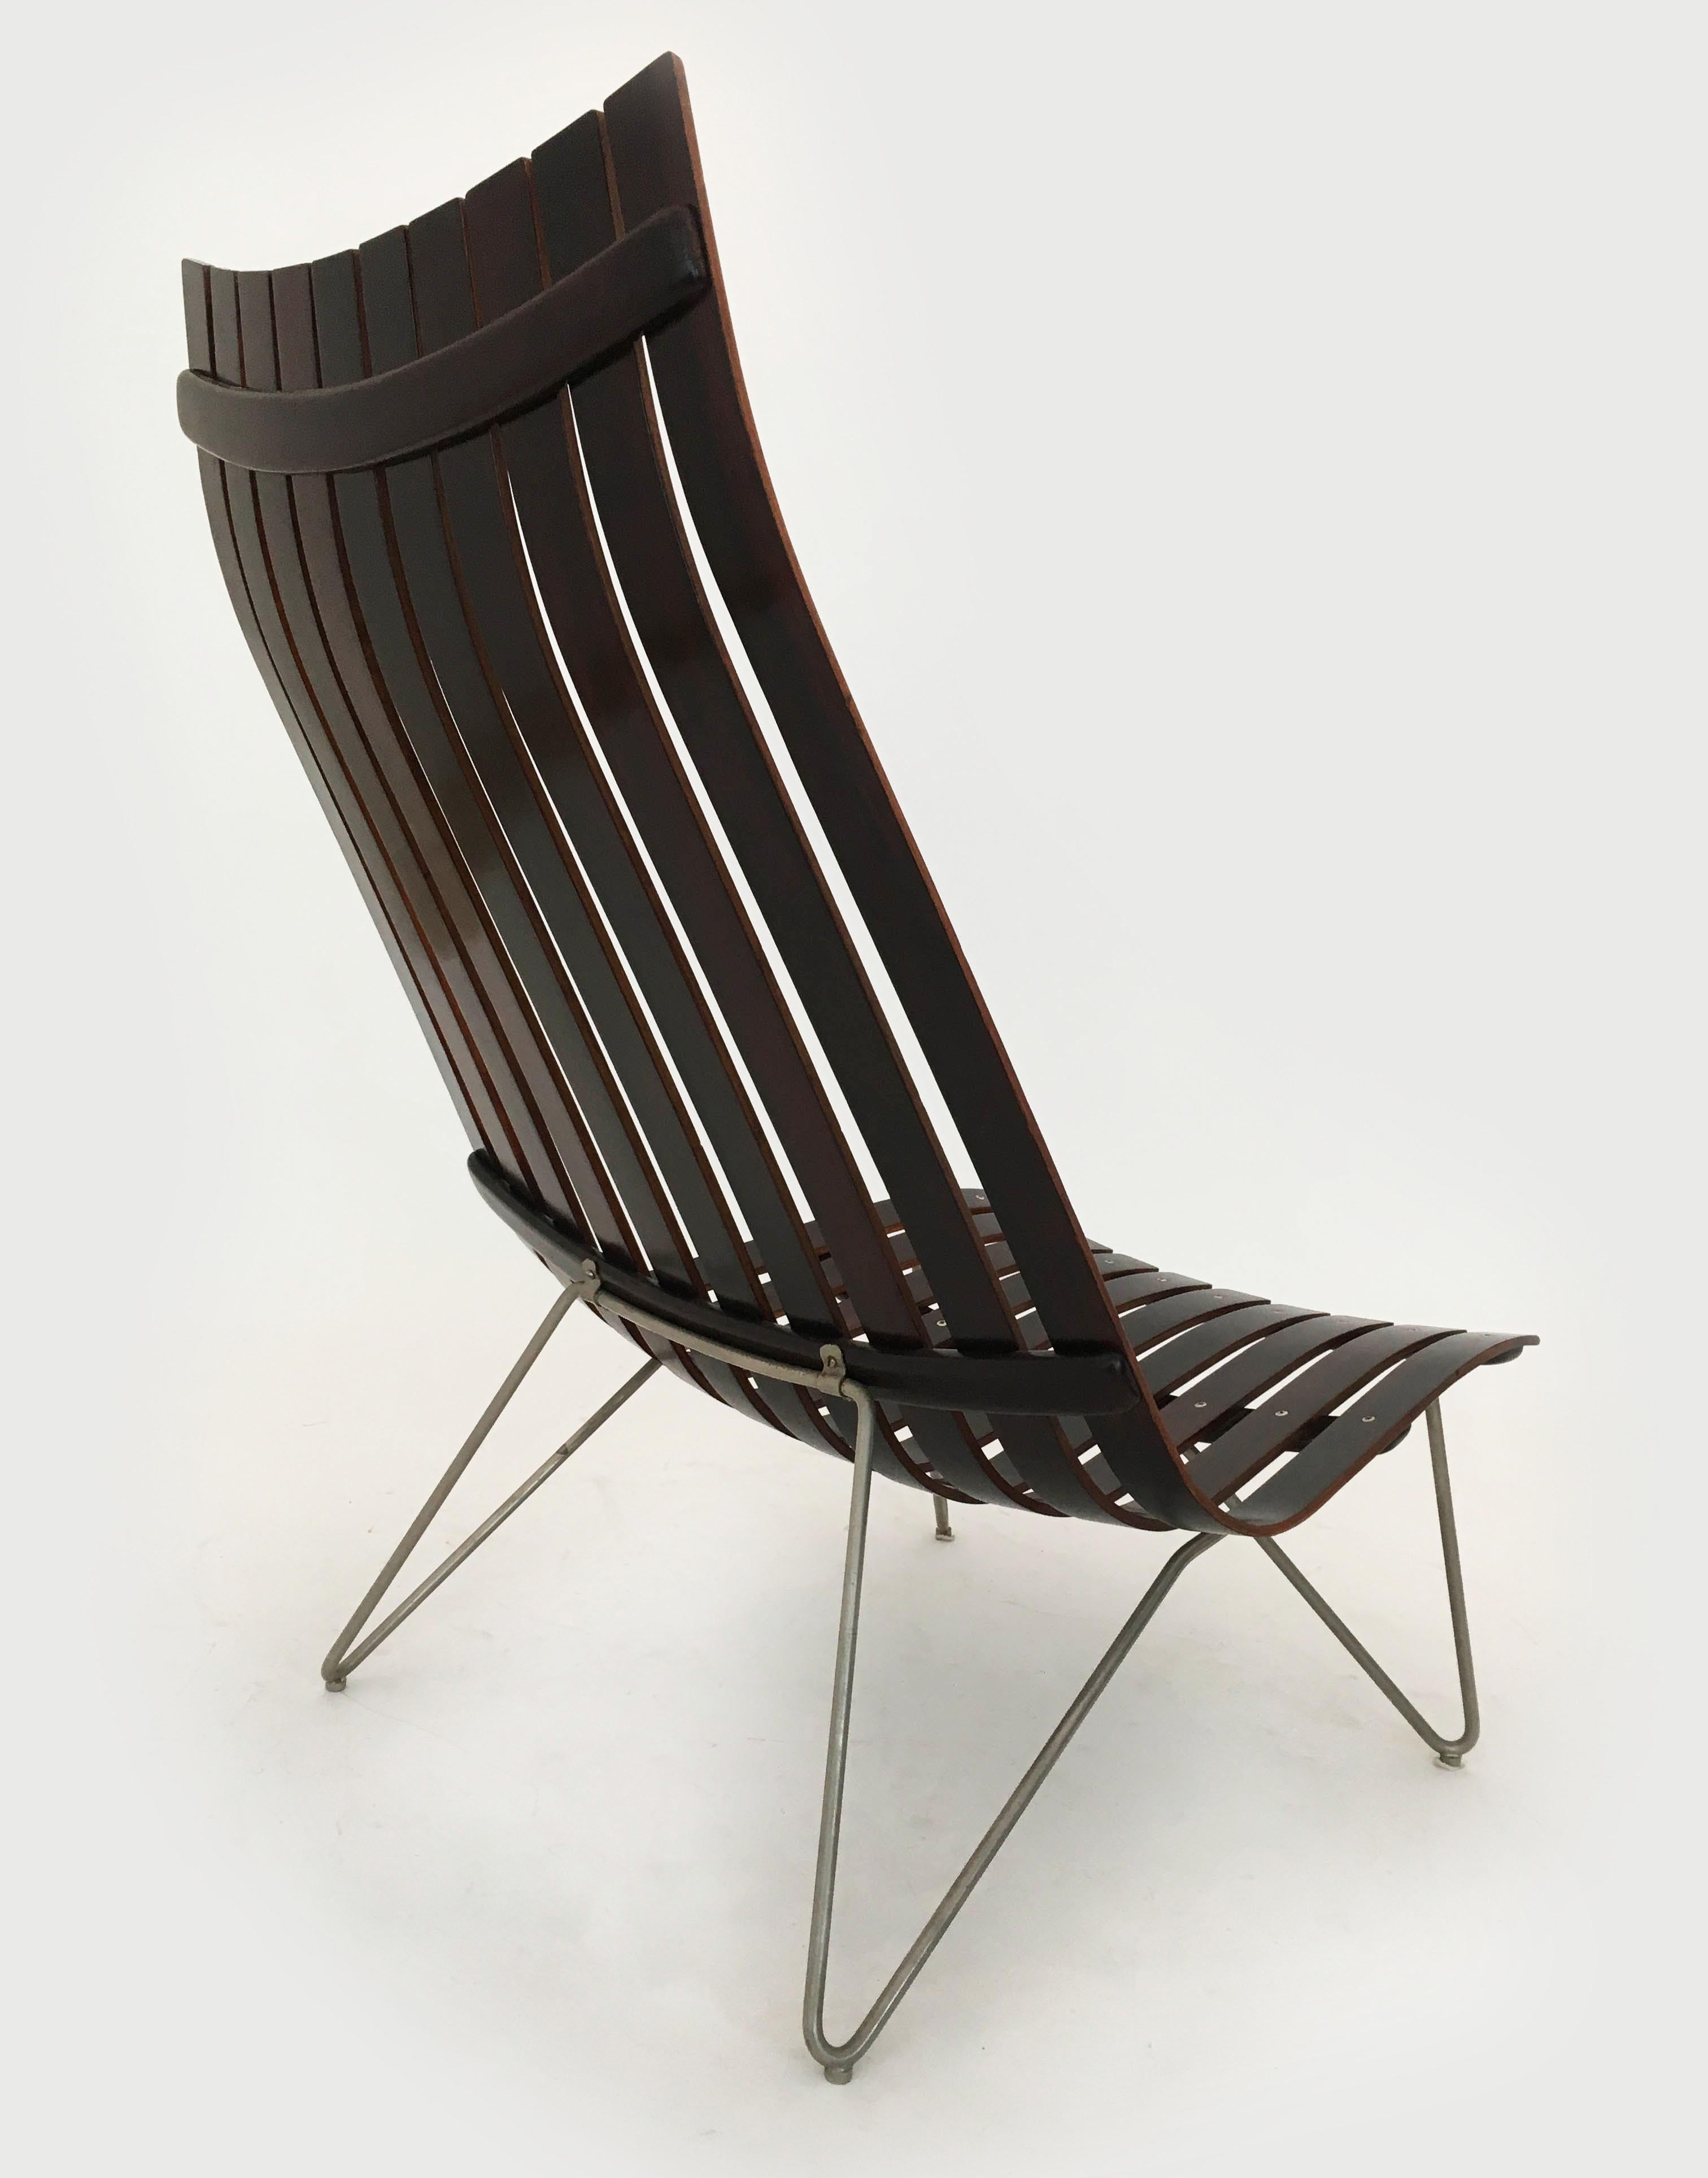 Mid-20th Century Hans Brattrud Lounge Chair Model 'Scandia' by Hove Mobler, Norway 1950s For Sale